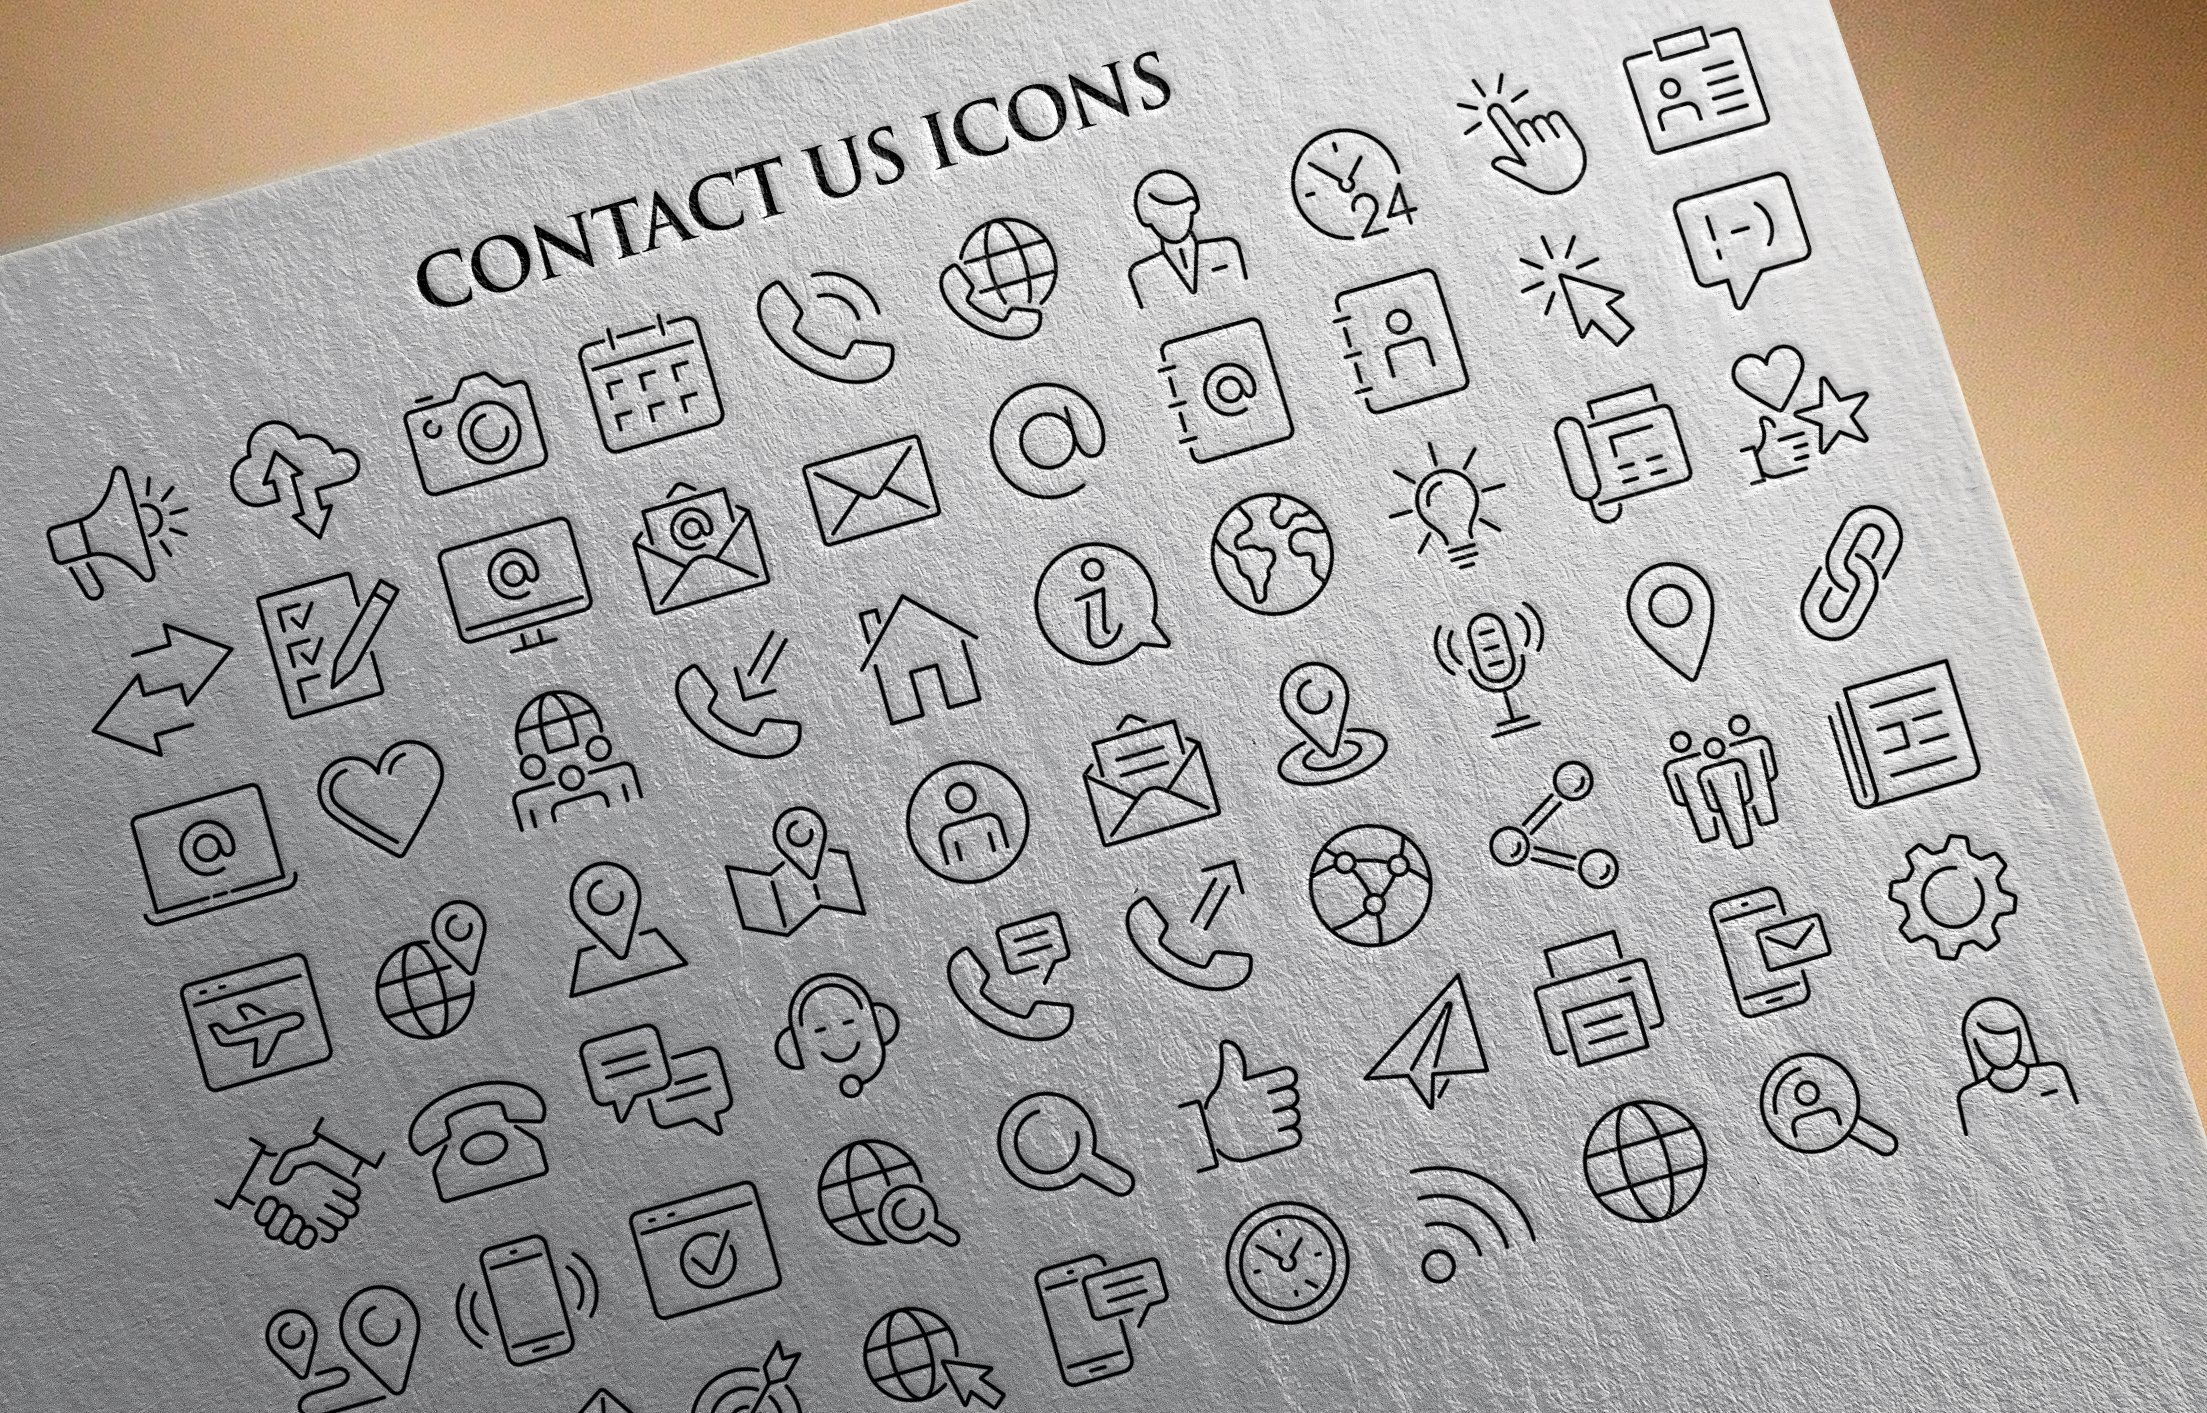 Contact Us Outline Vector Icon Set cover image.